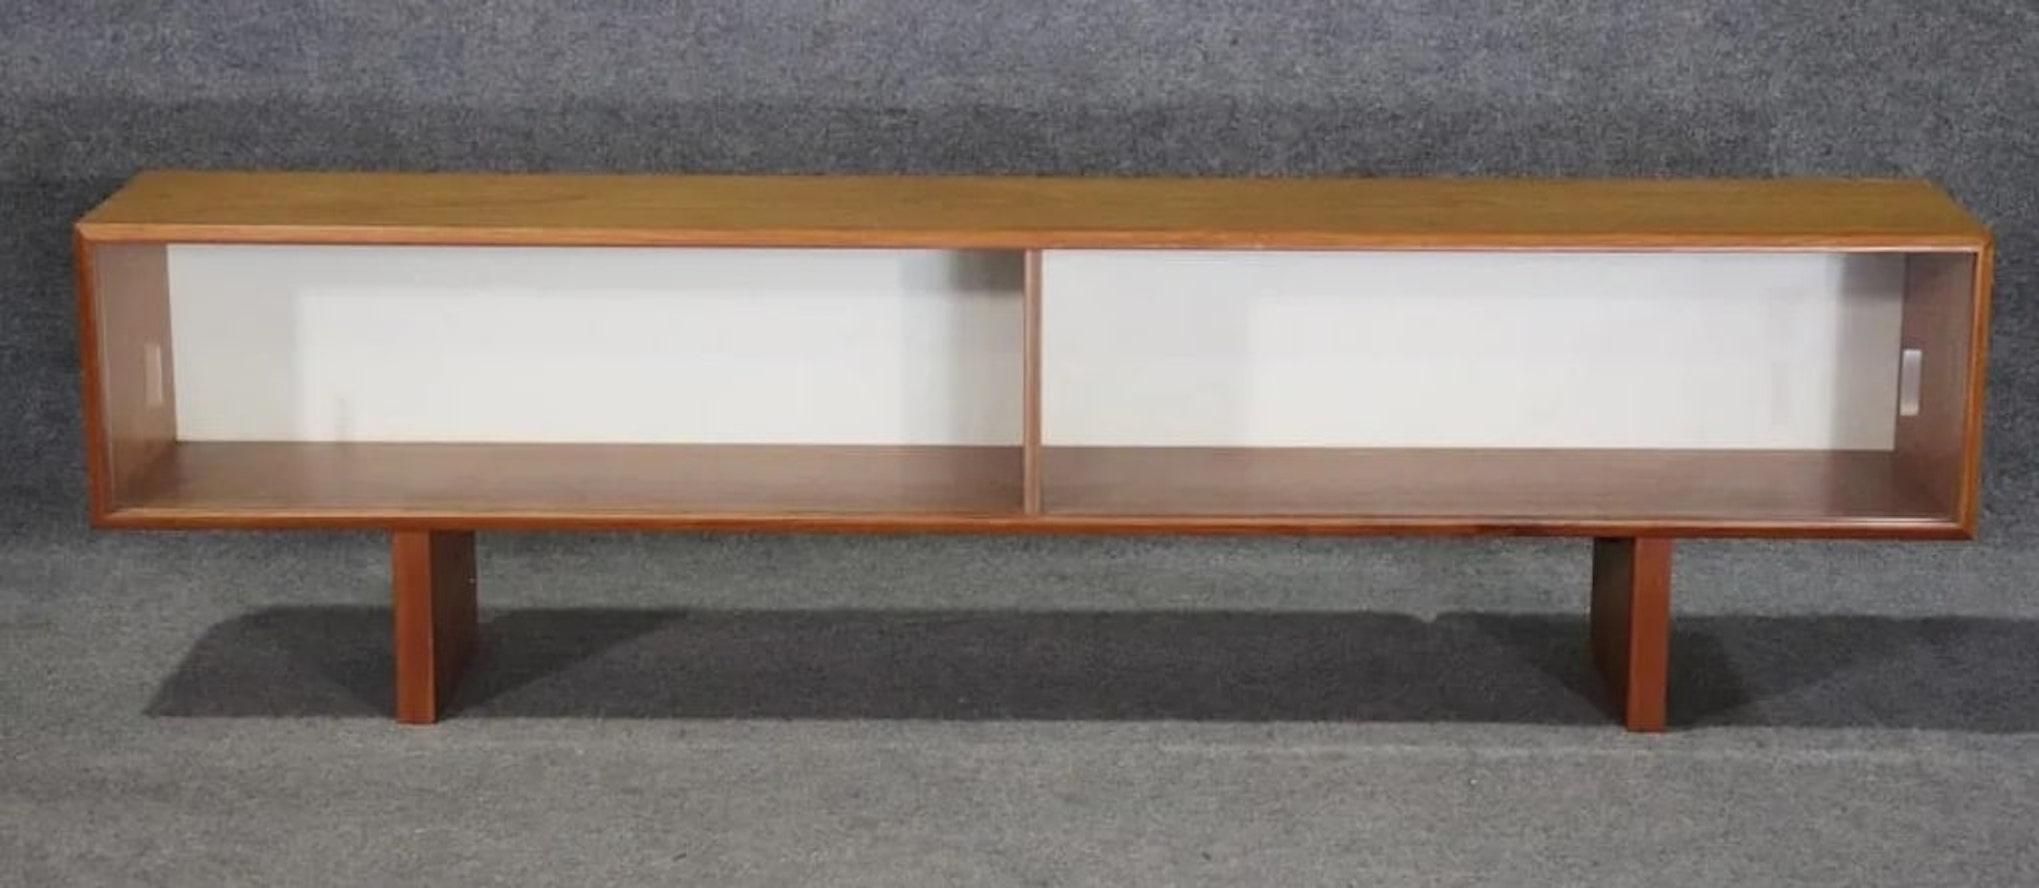 Danish modern credenza topper with sliding doors for book storage use. Designed by Peter Lovig Nielsen.
Please confirm location NY or NJ